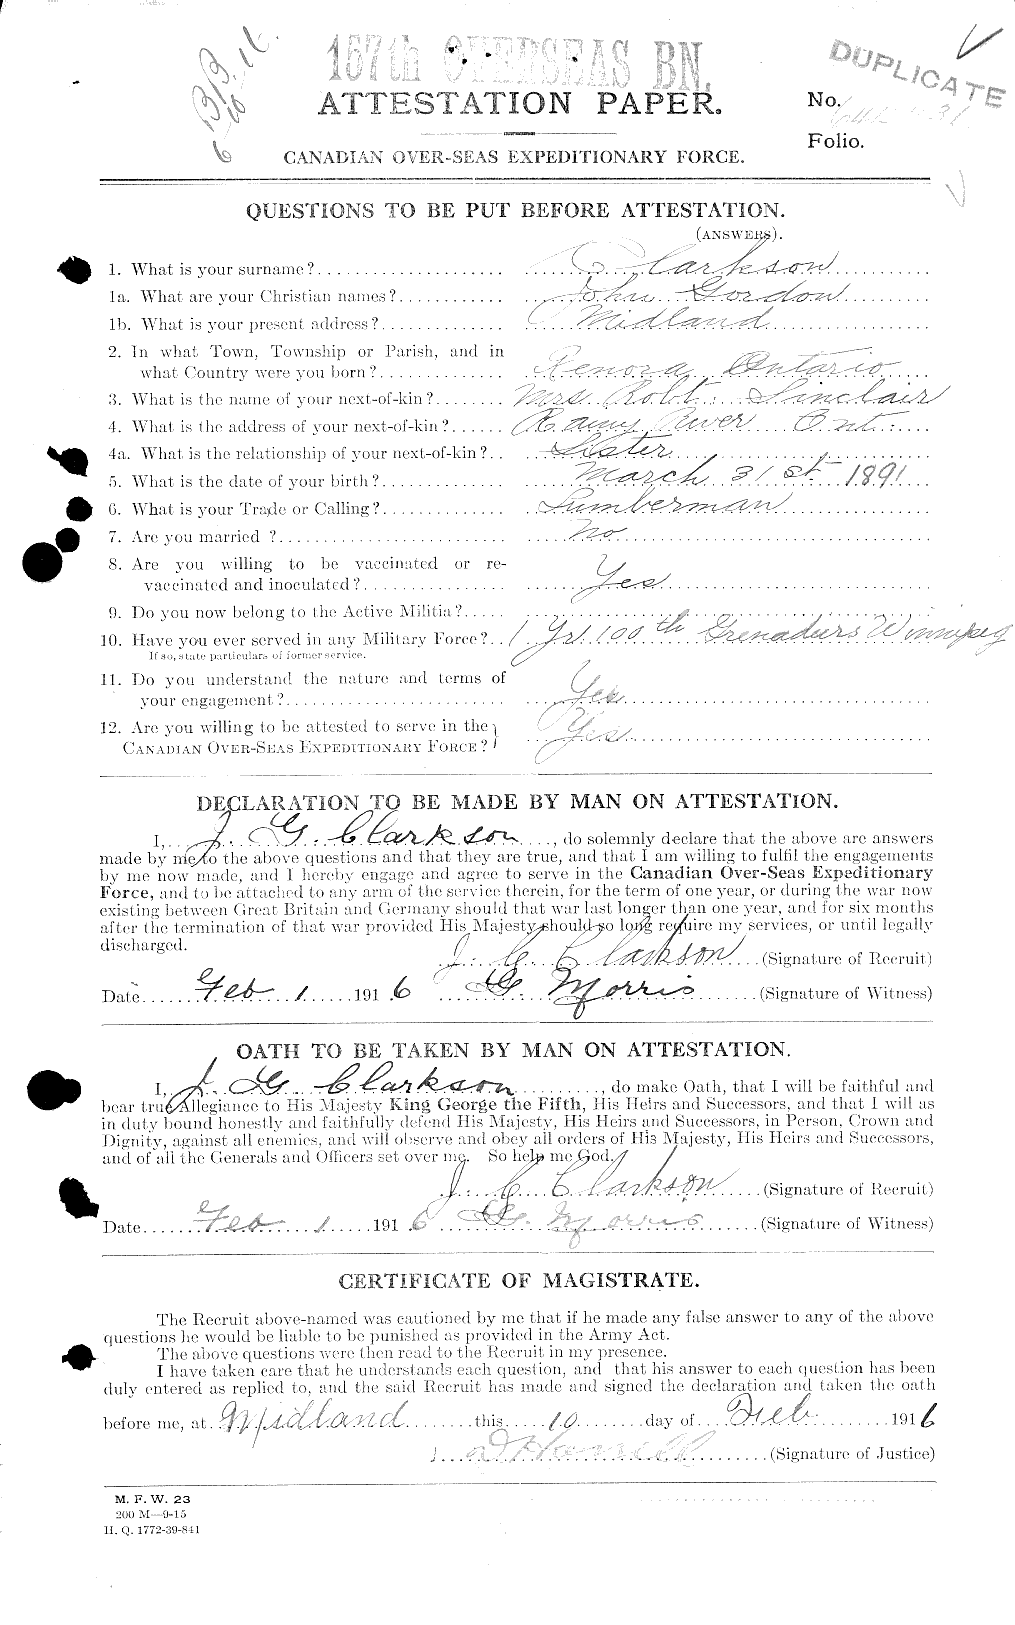 Personnel Records of the First World War - CEF 021456a